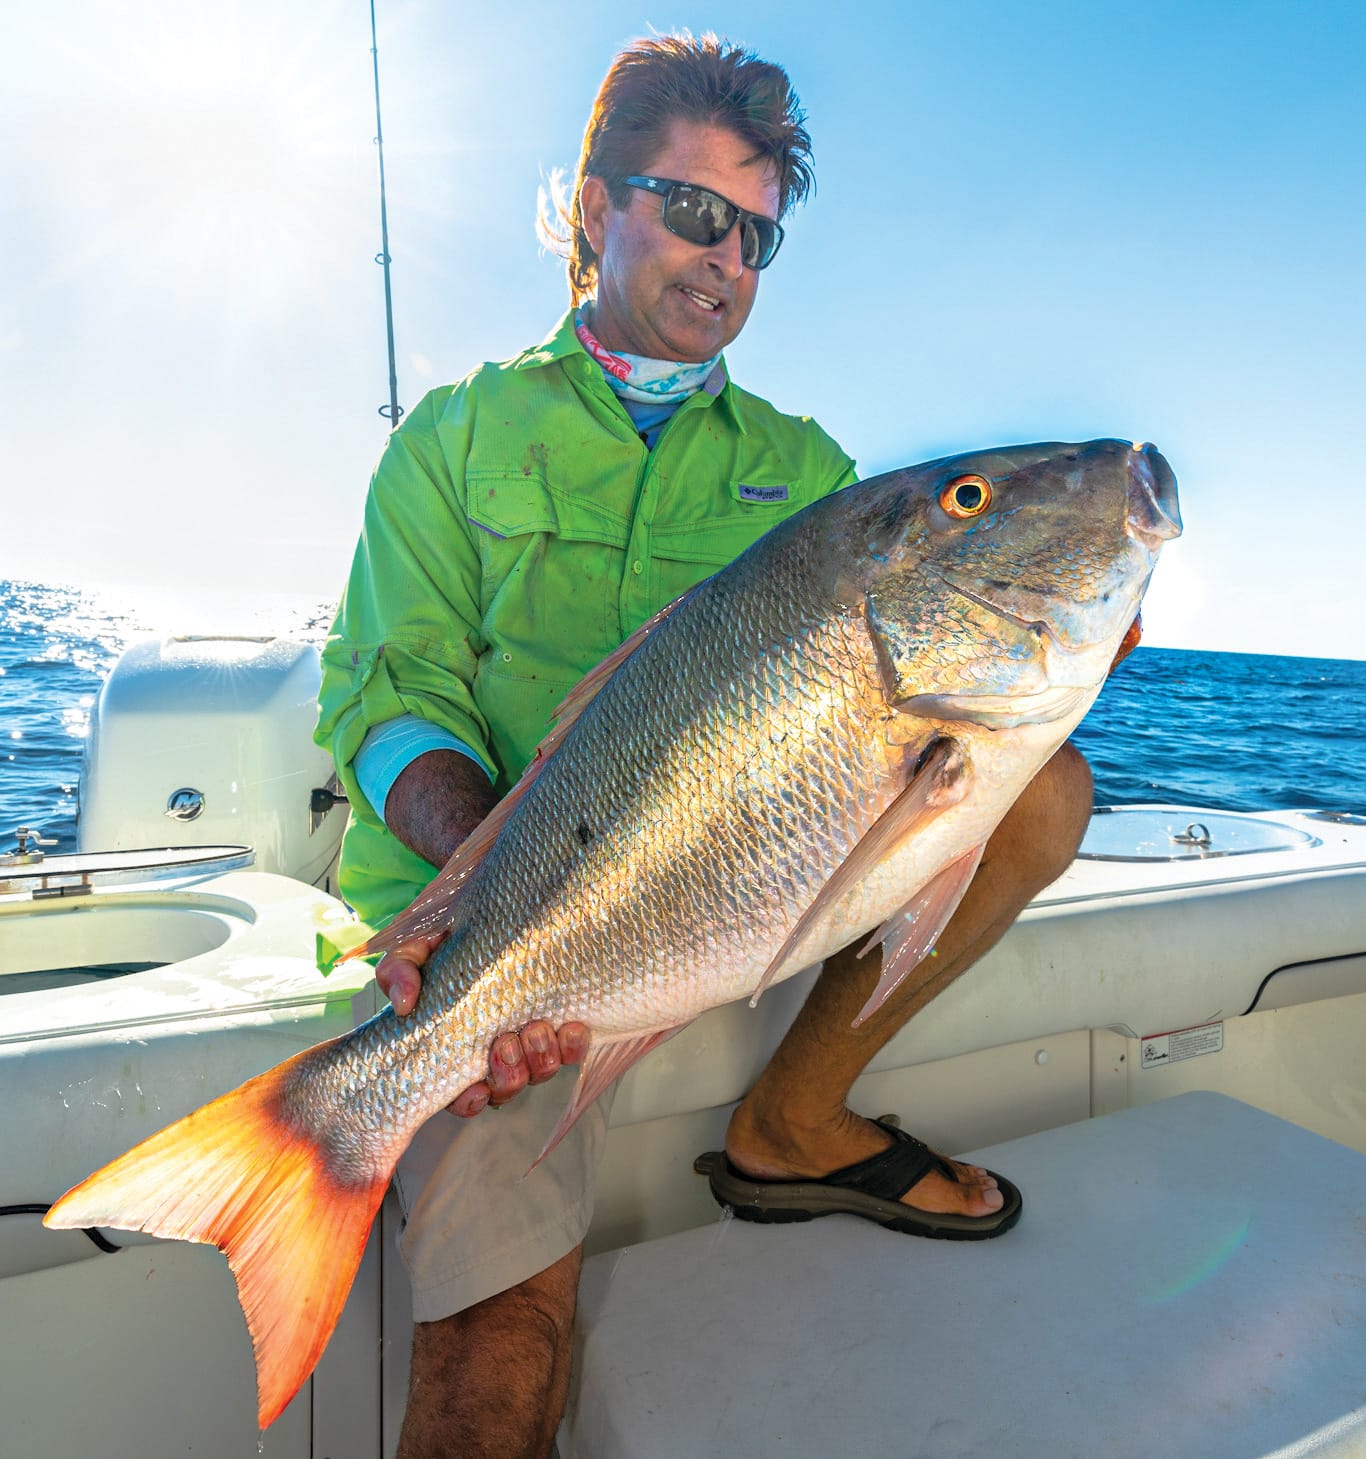 How Long of a Leader is Best for Inshore Fishing? (The Complete